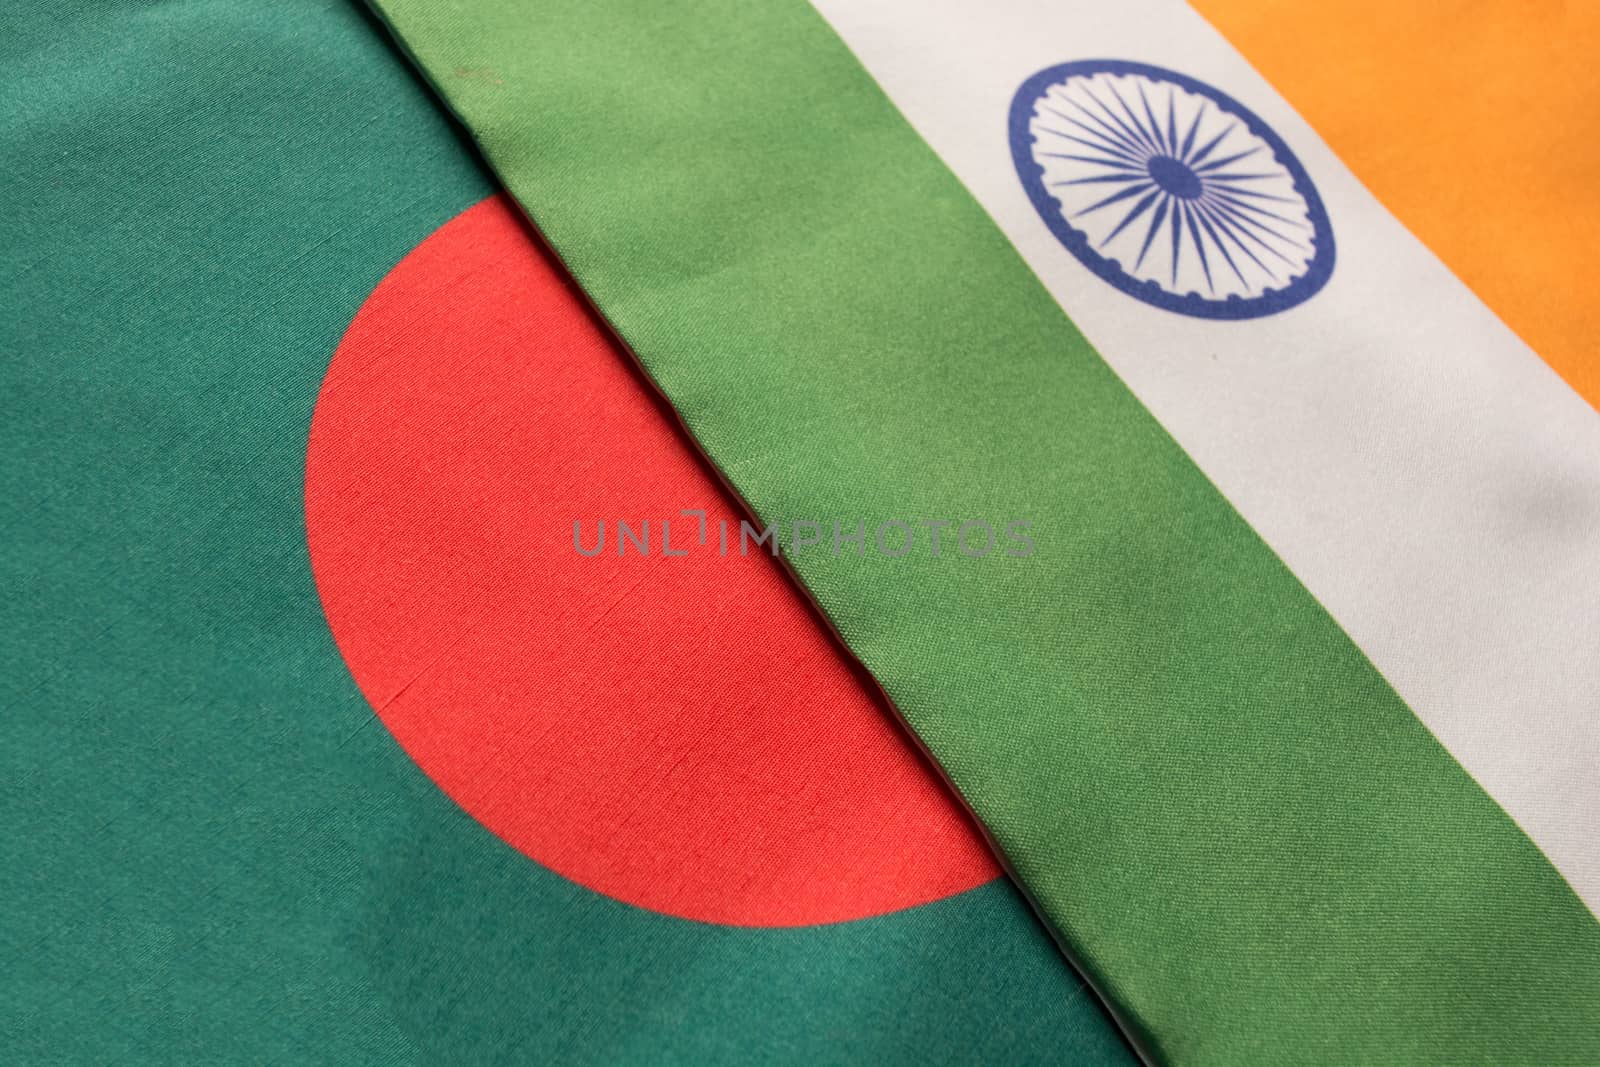 Bangladesh and Indian flags placed on table.